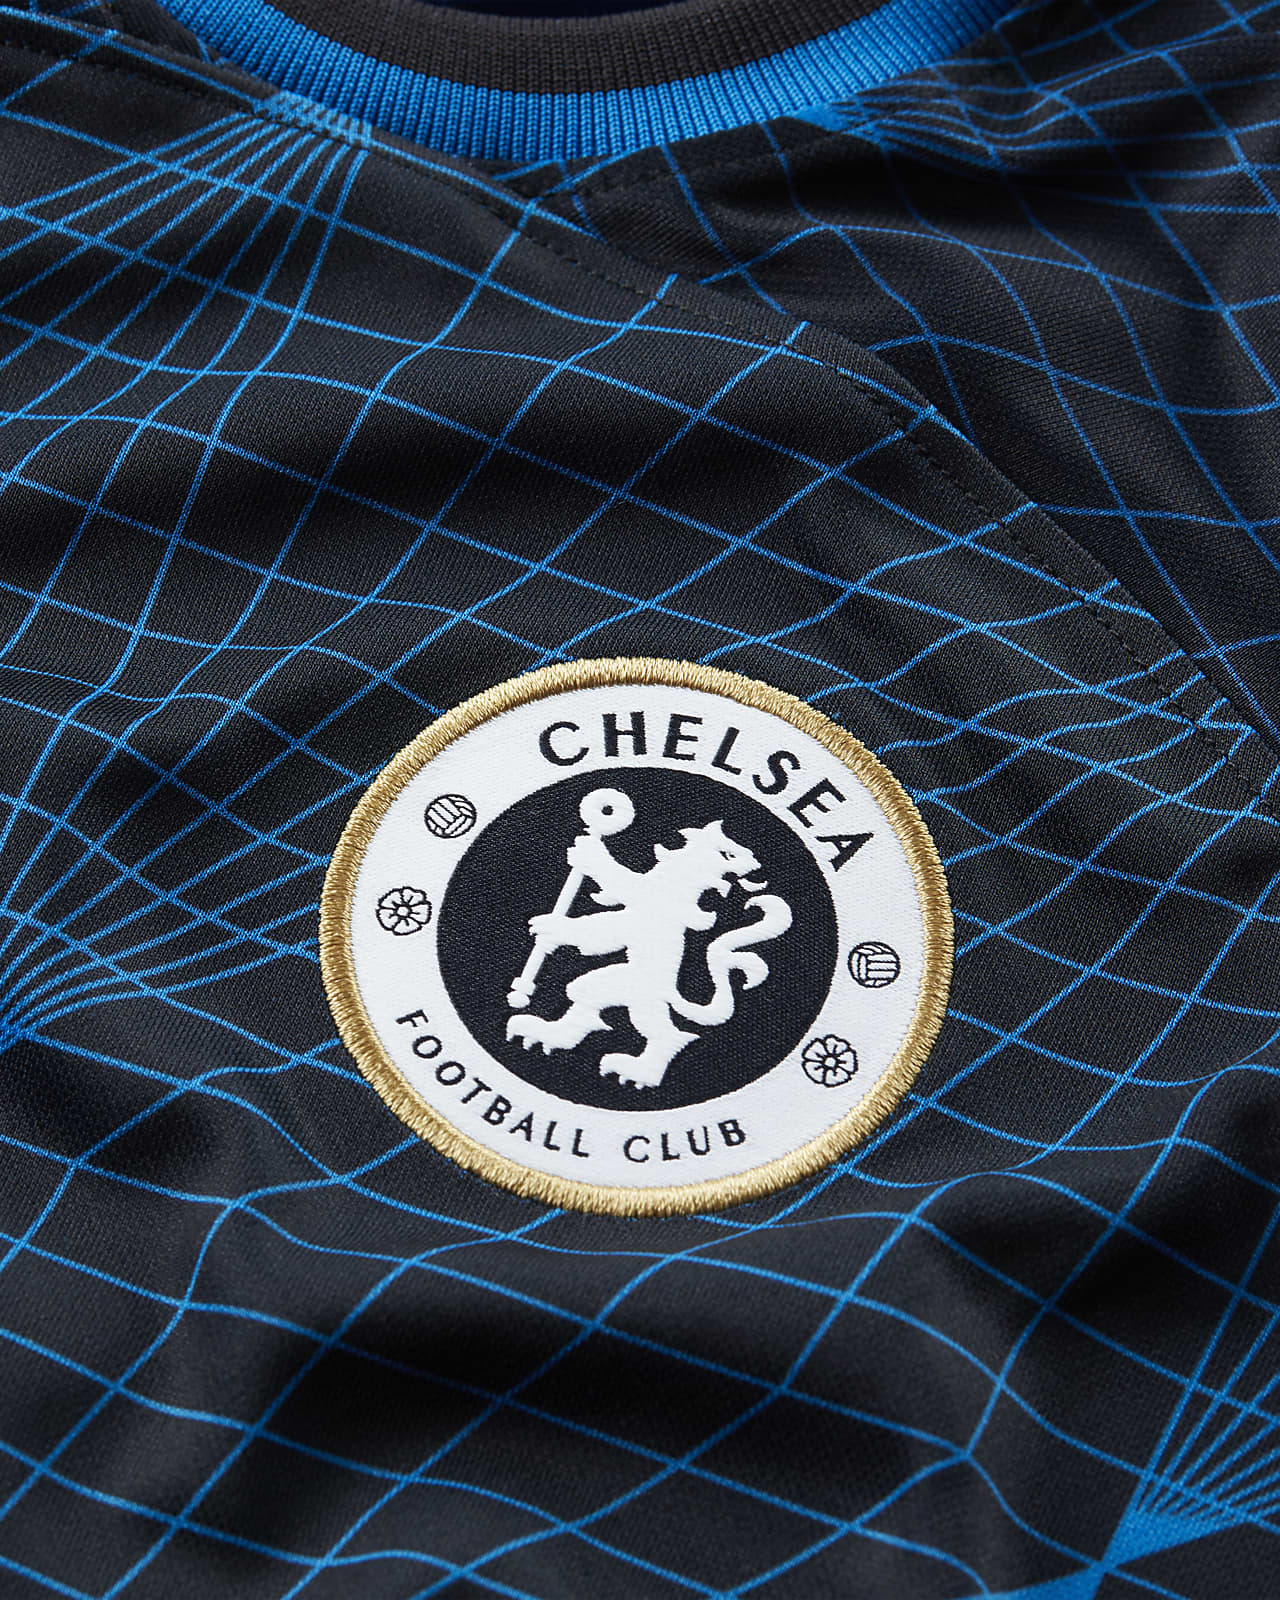 Nike Football Chelsea FC 2020/21 stadium home jersey in blue